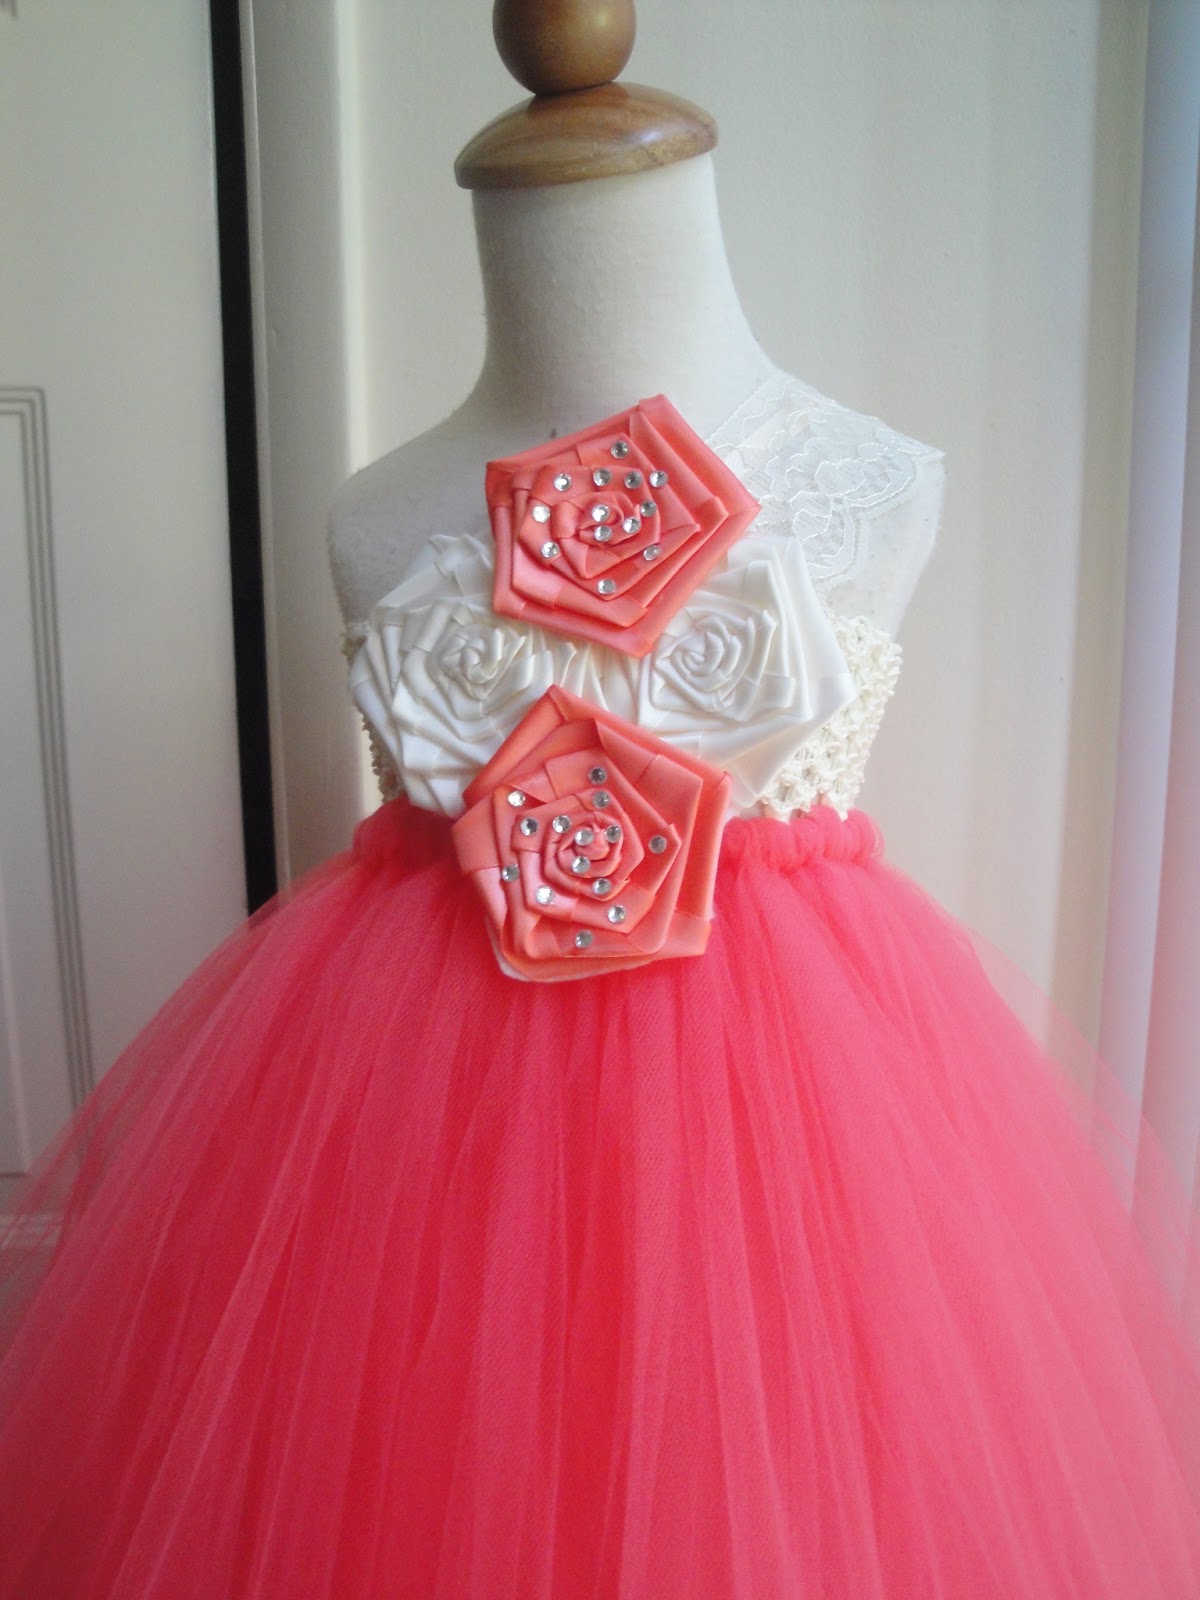 Hollywoodtutu dresses: flower girl tutu dress in Coral,ivory and lace